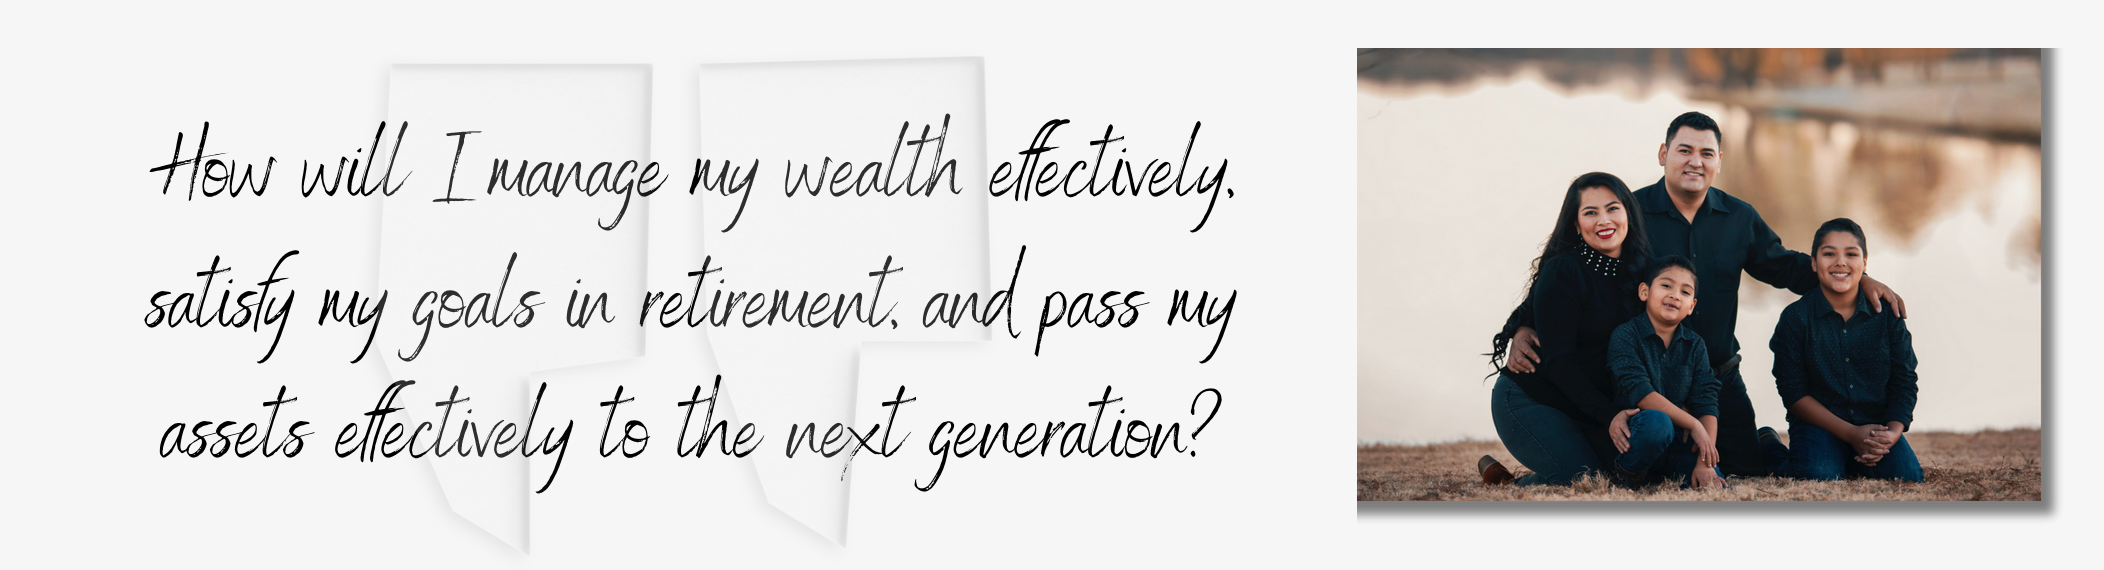 How will I manage my wealth effectively, satisfy my goals in retirement, and pass my assets effectively to the next generation?